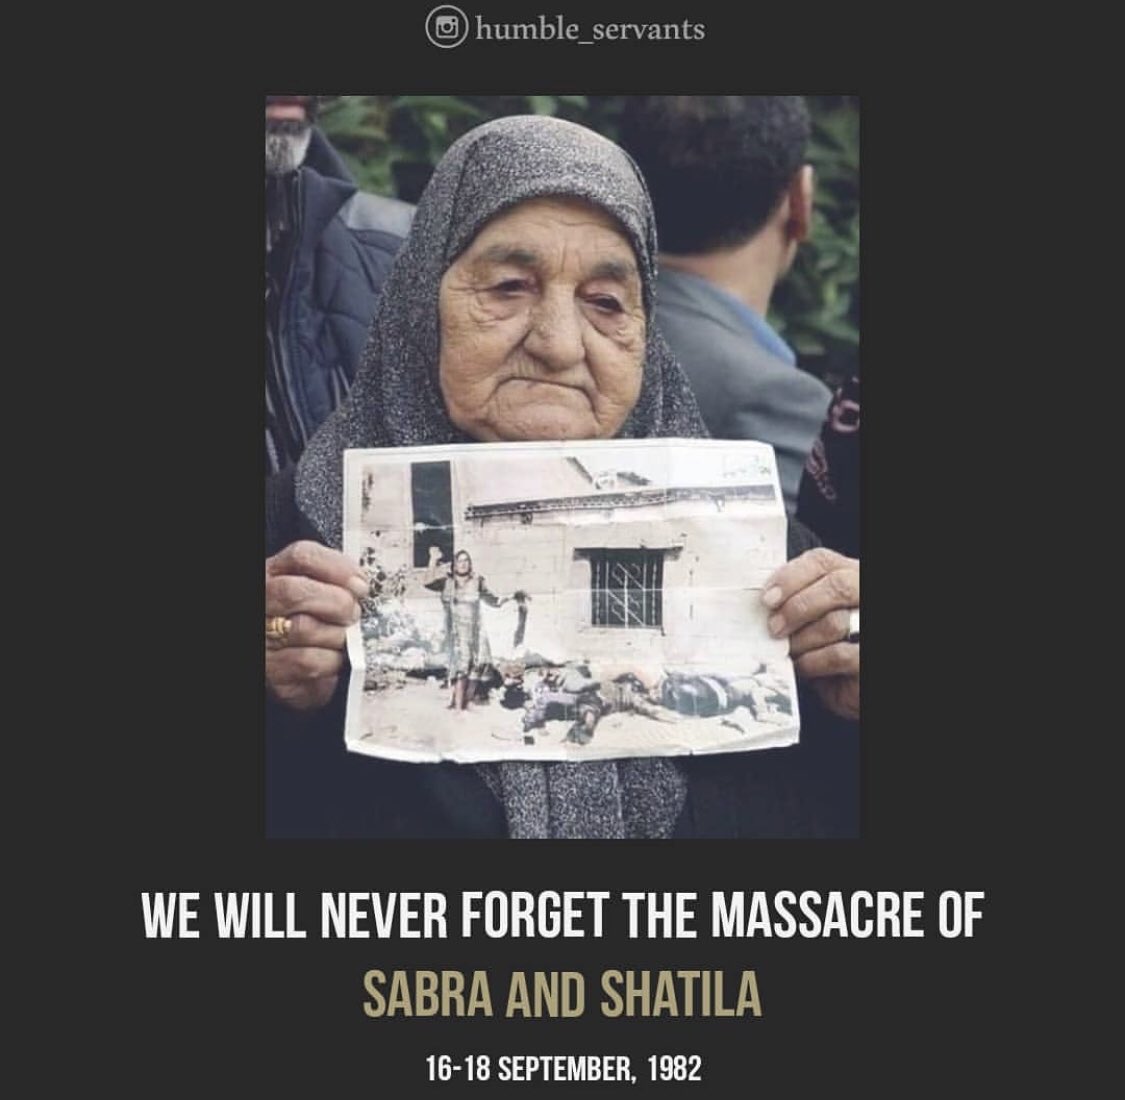 And these #Zionists have the audacity to talk about the #Holocaust and make at least one movie a year about their plight and suffering while they slaughtered innocent women and children. #SabraShatila #Lebanon